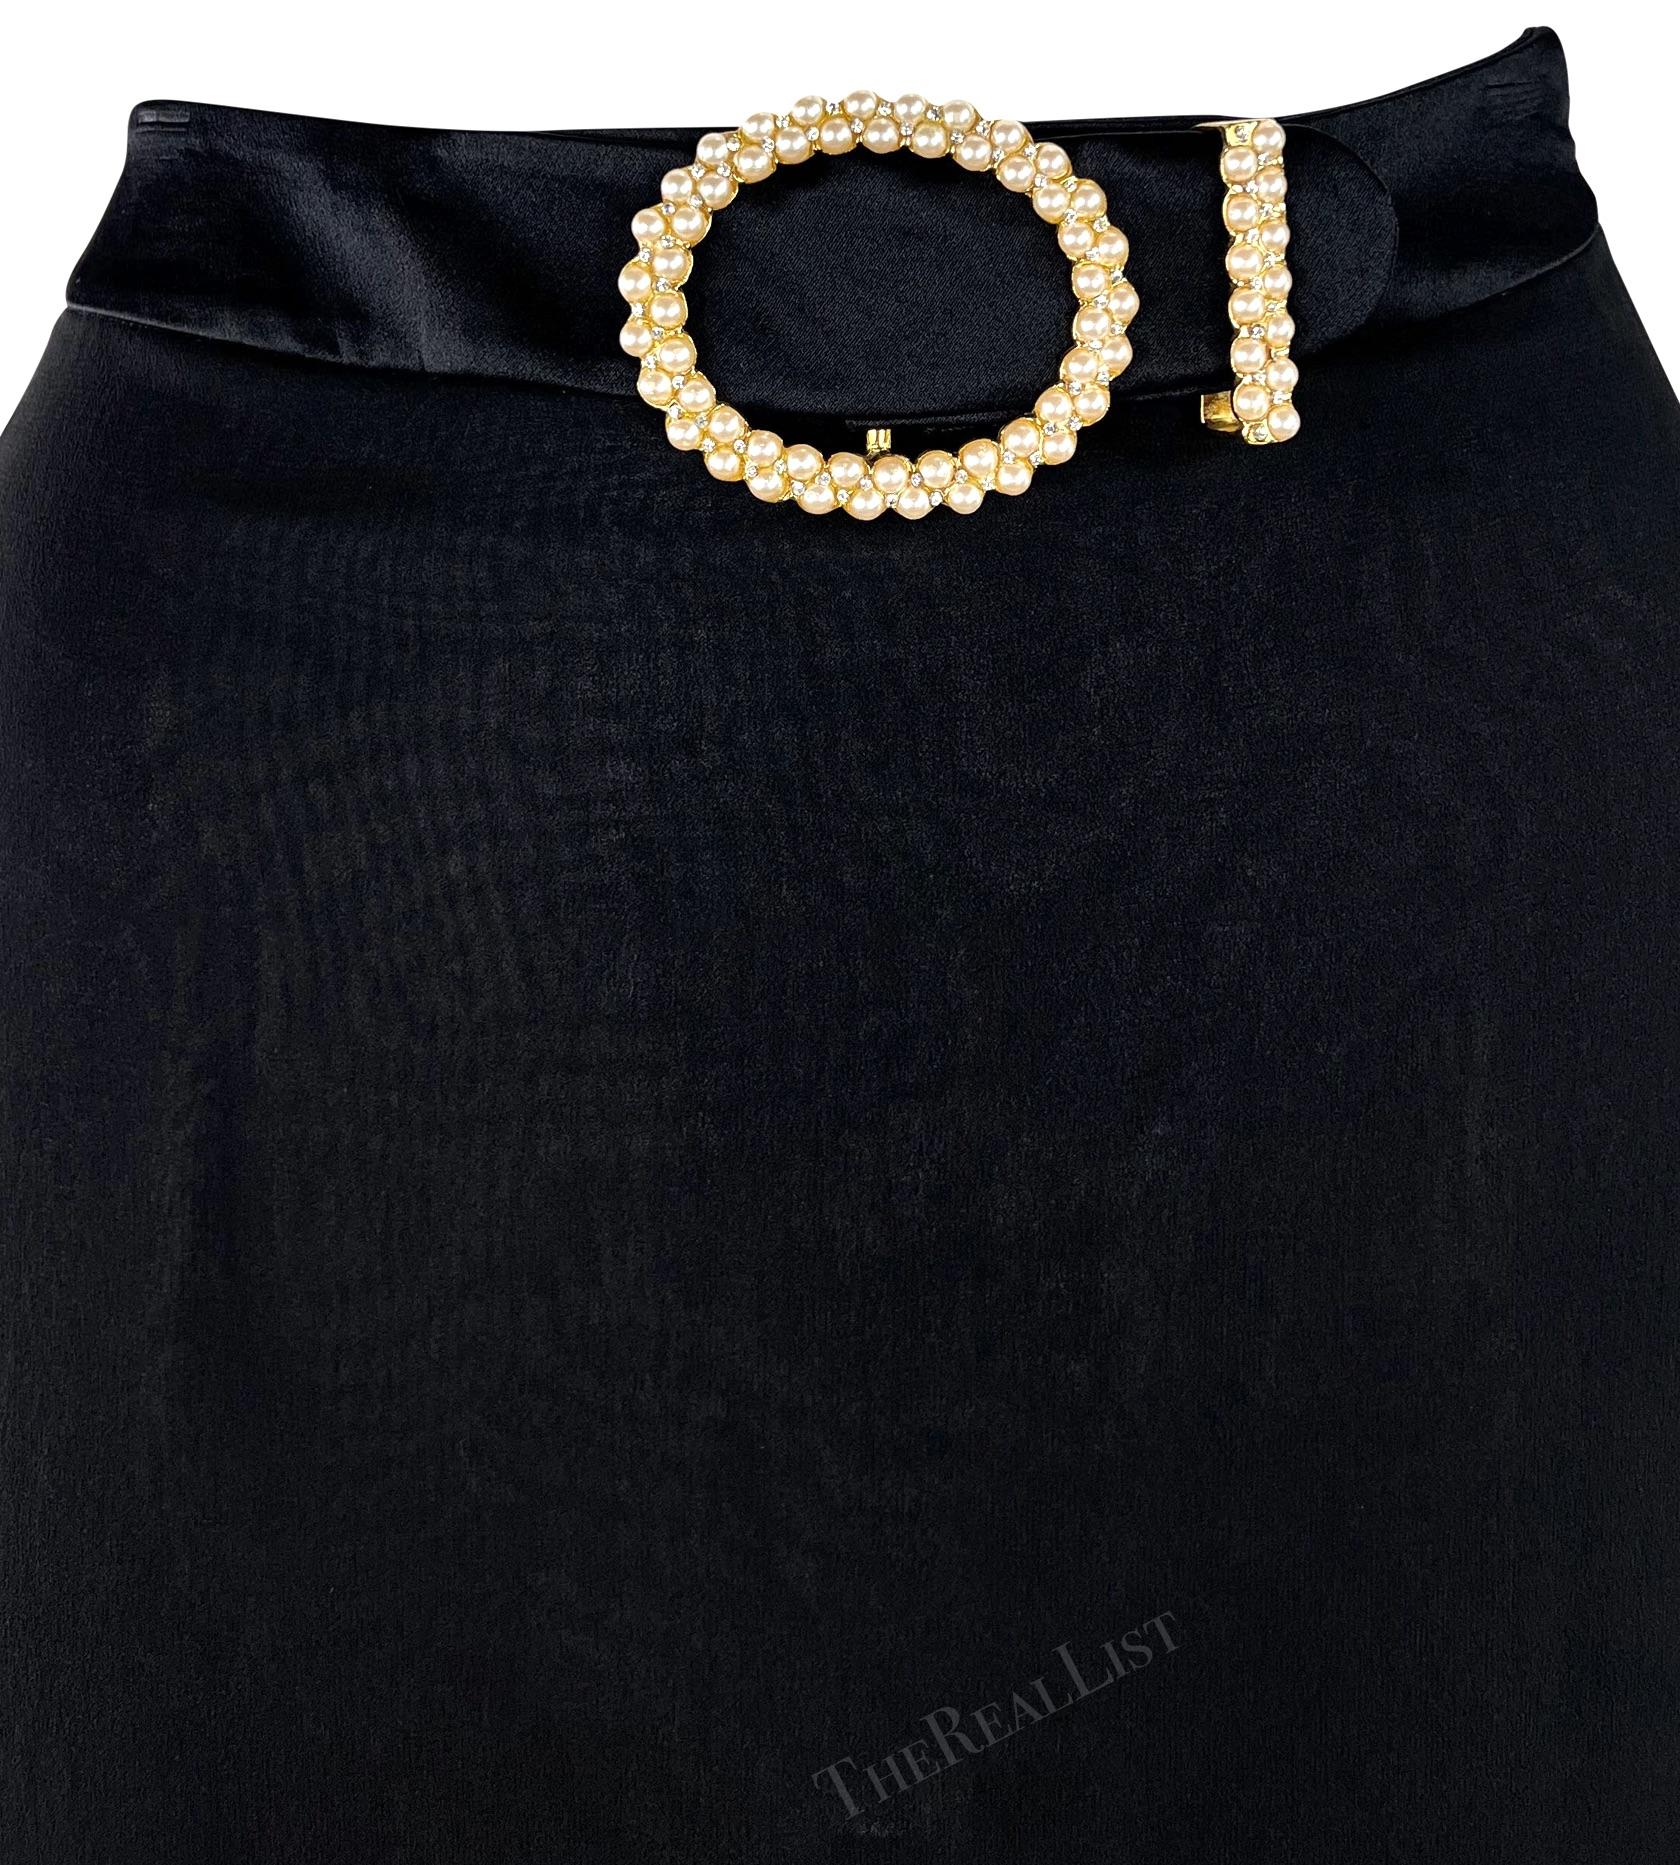 F/W 1996 Valentino Garavani Runway Sheer Black Pearl Rhinestone Buckle Skirt In Excellent Condition For Sale In West Hollywood, CA